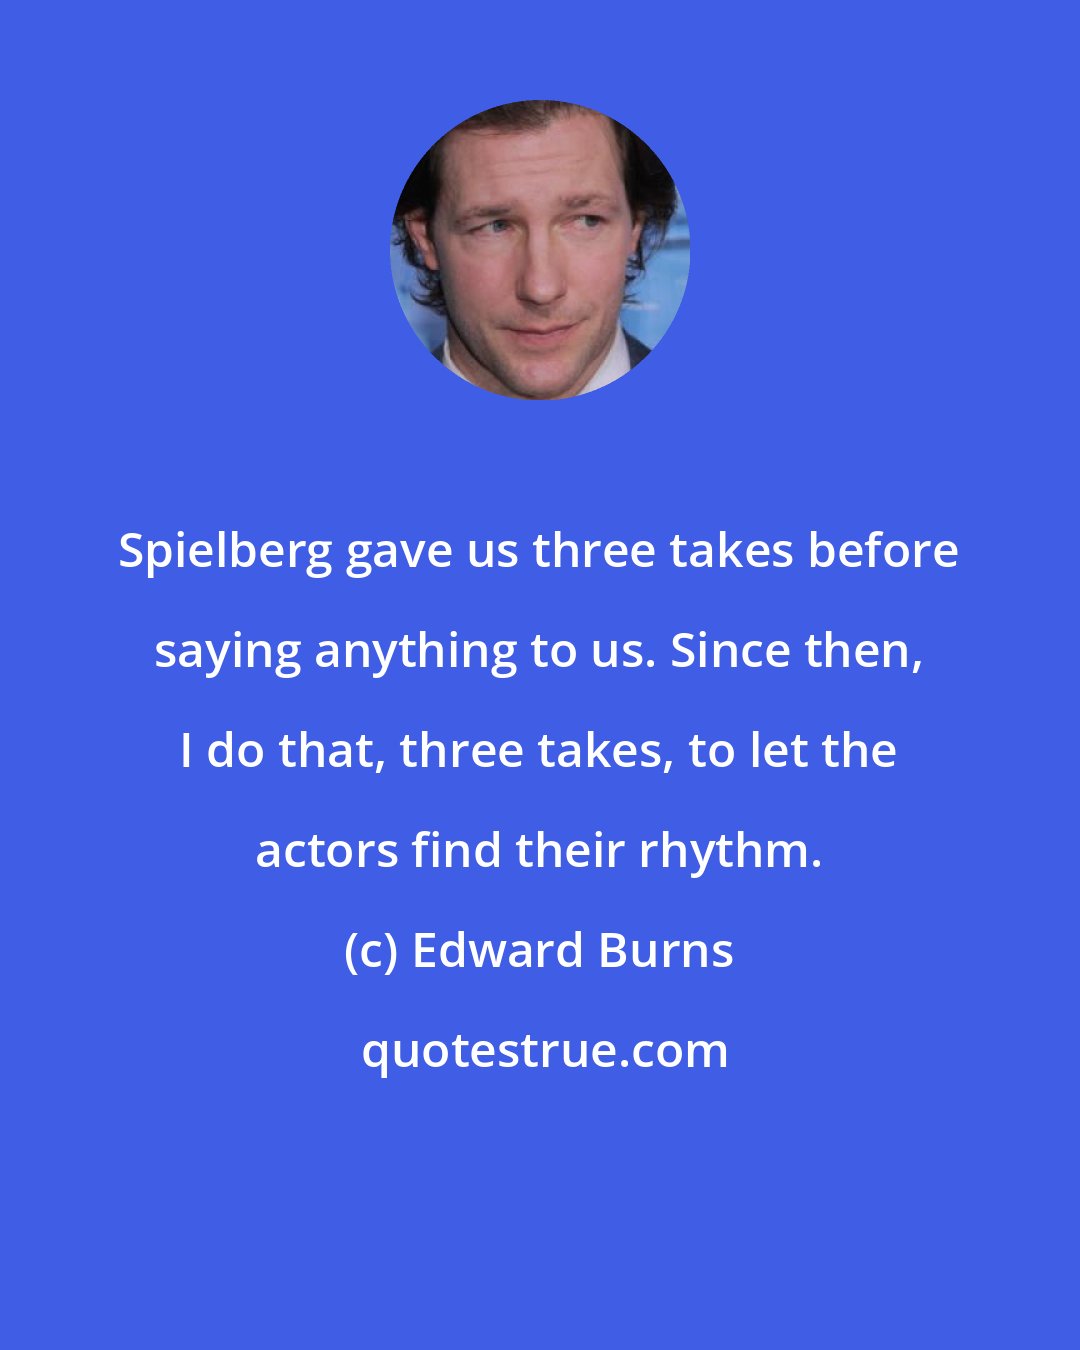 Edward Burns: Spielberg gave us three takes before saying anything to us. Since then, I do that, three takes, to let the actors find their rhythm.